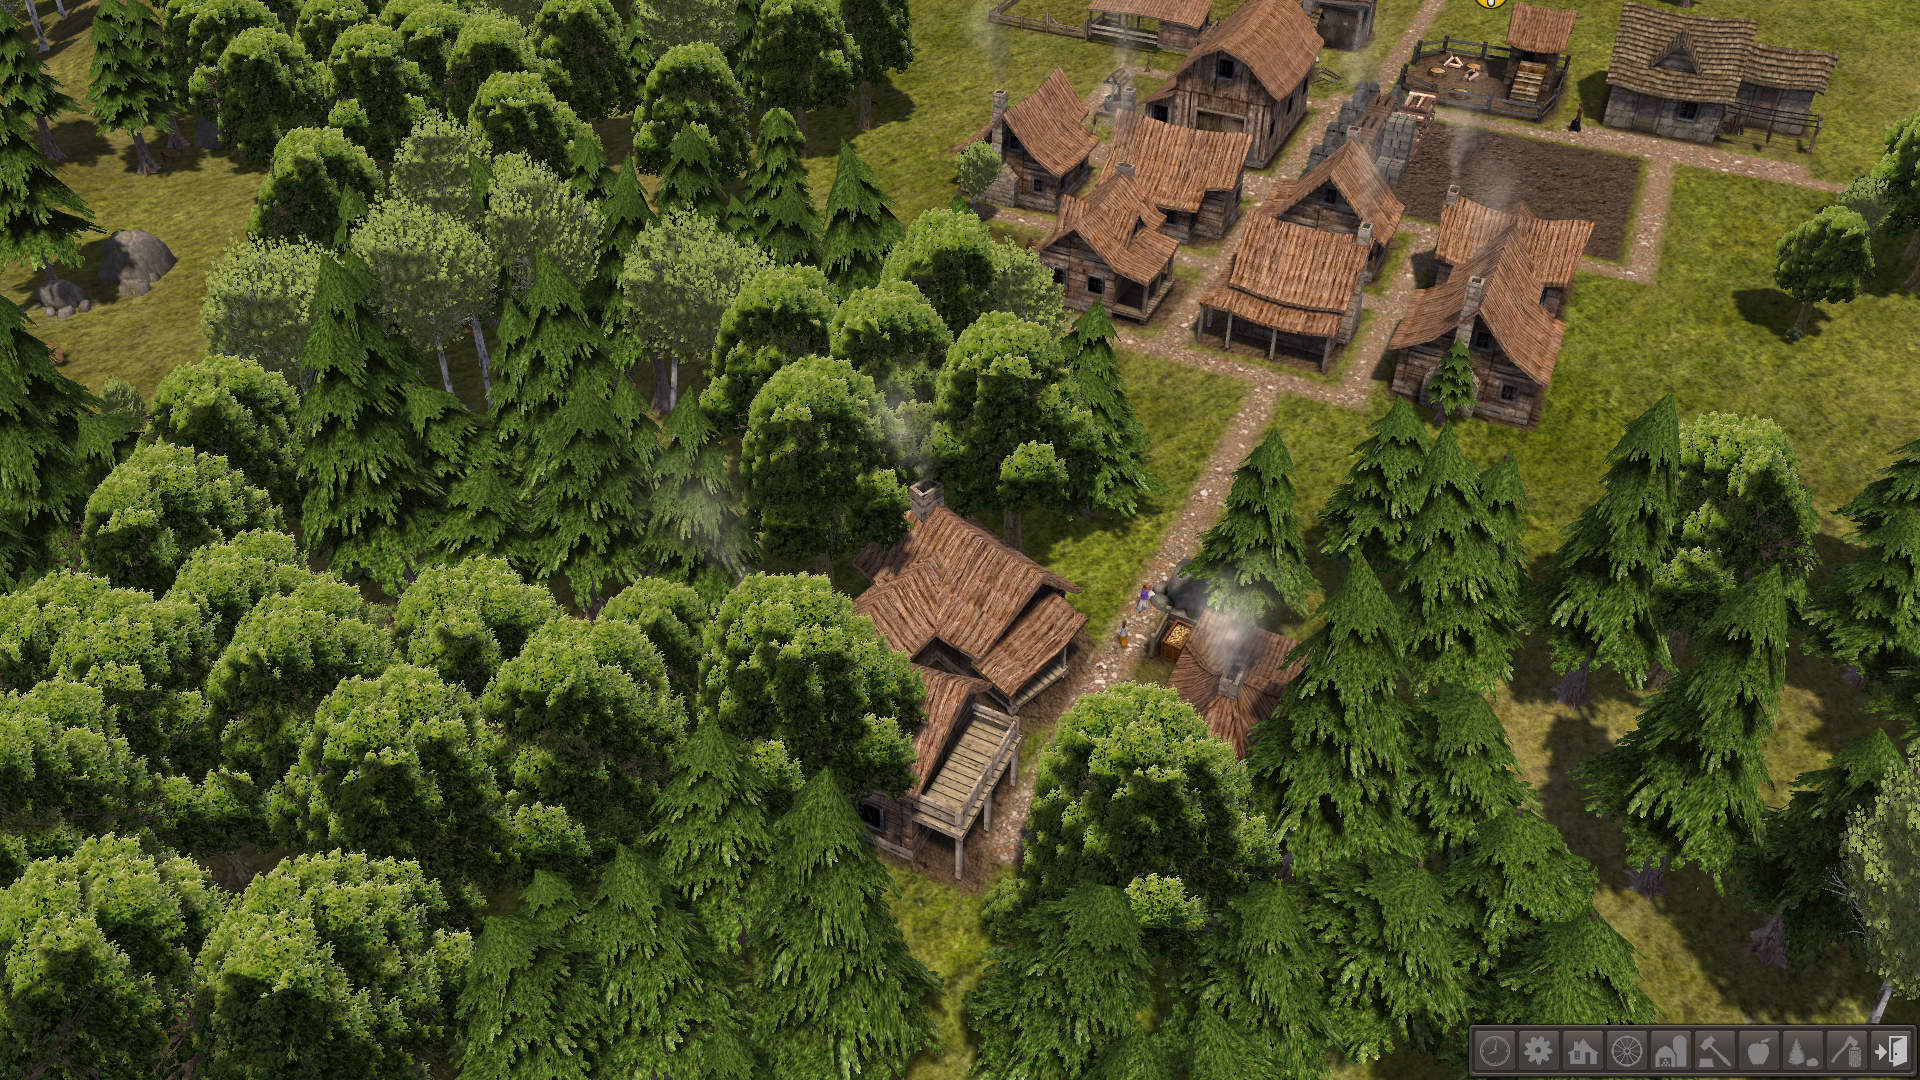 Houses in the forest